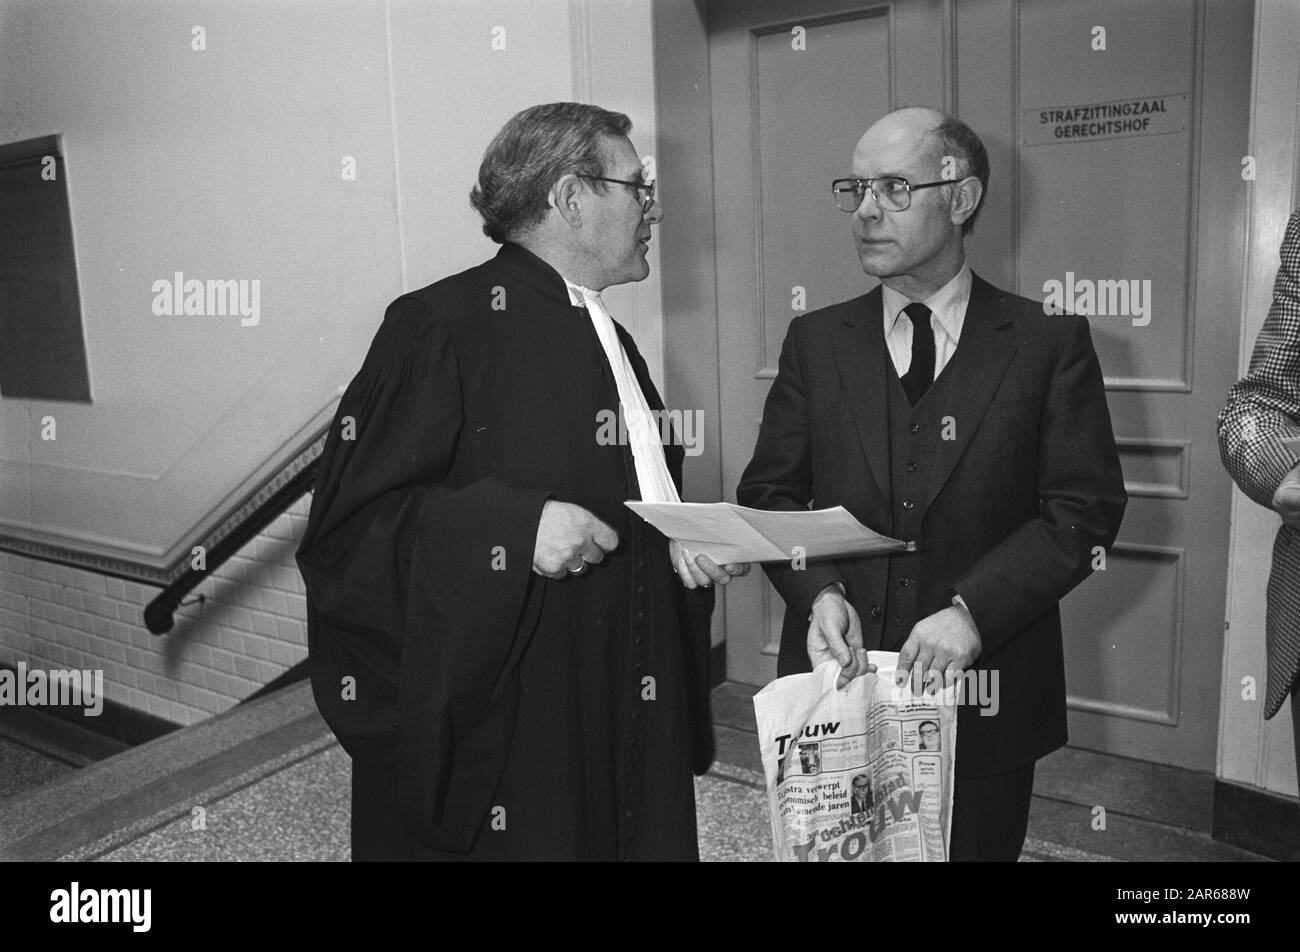 Brief action by Stoop against Trouw on mention sponsorship name Starlift for volleyball club Corbilo; head of Trouw Date: April 2, 1980 Keywords: GEDING, CONTATIONS, counselors Personal name : Y.A. Stoop Stock Photo